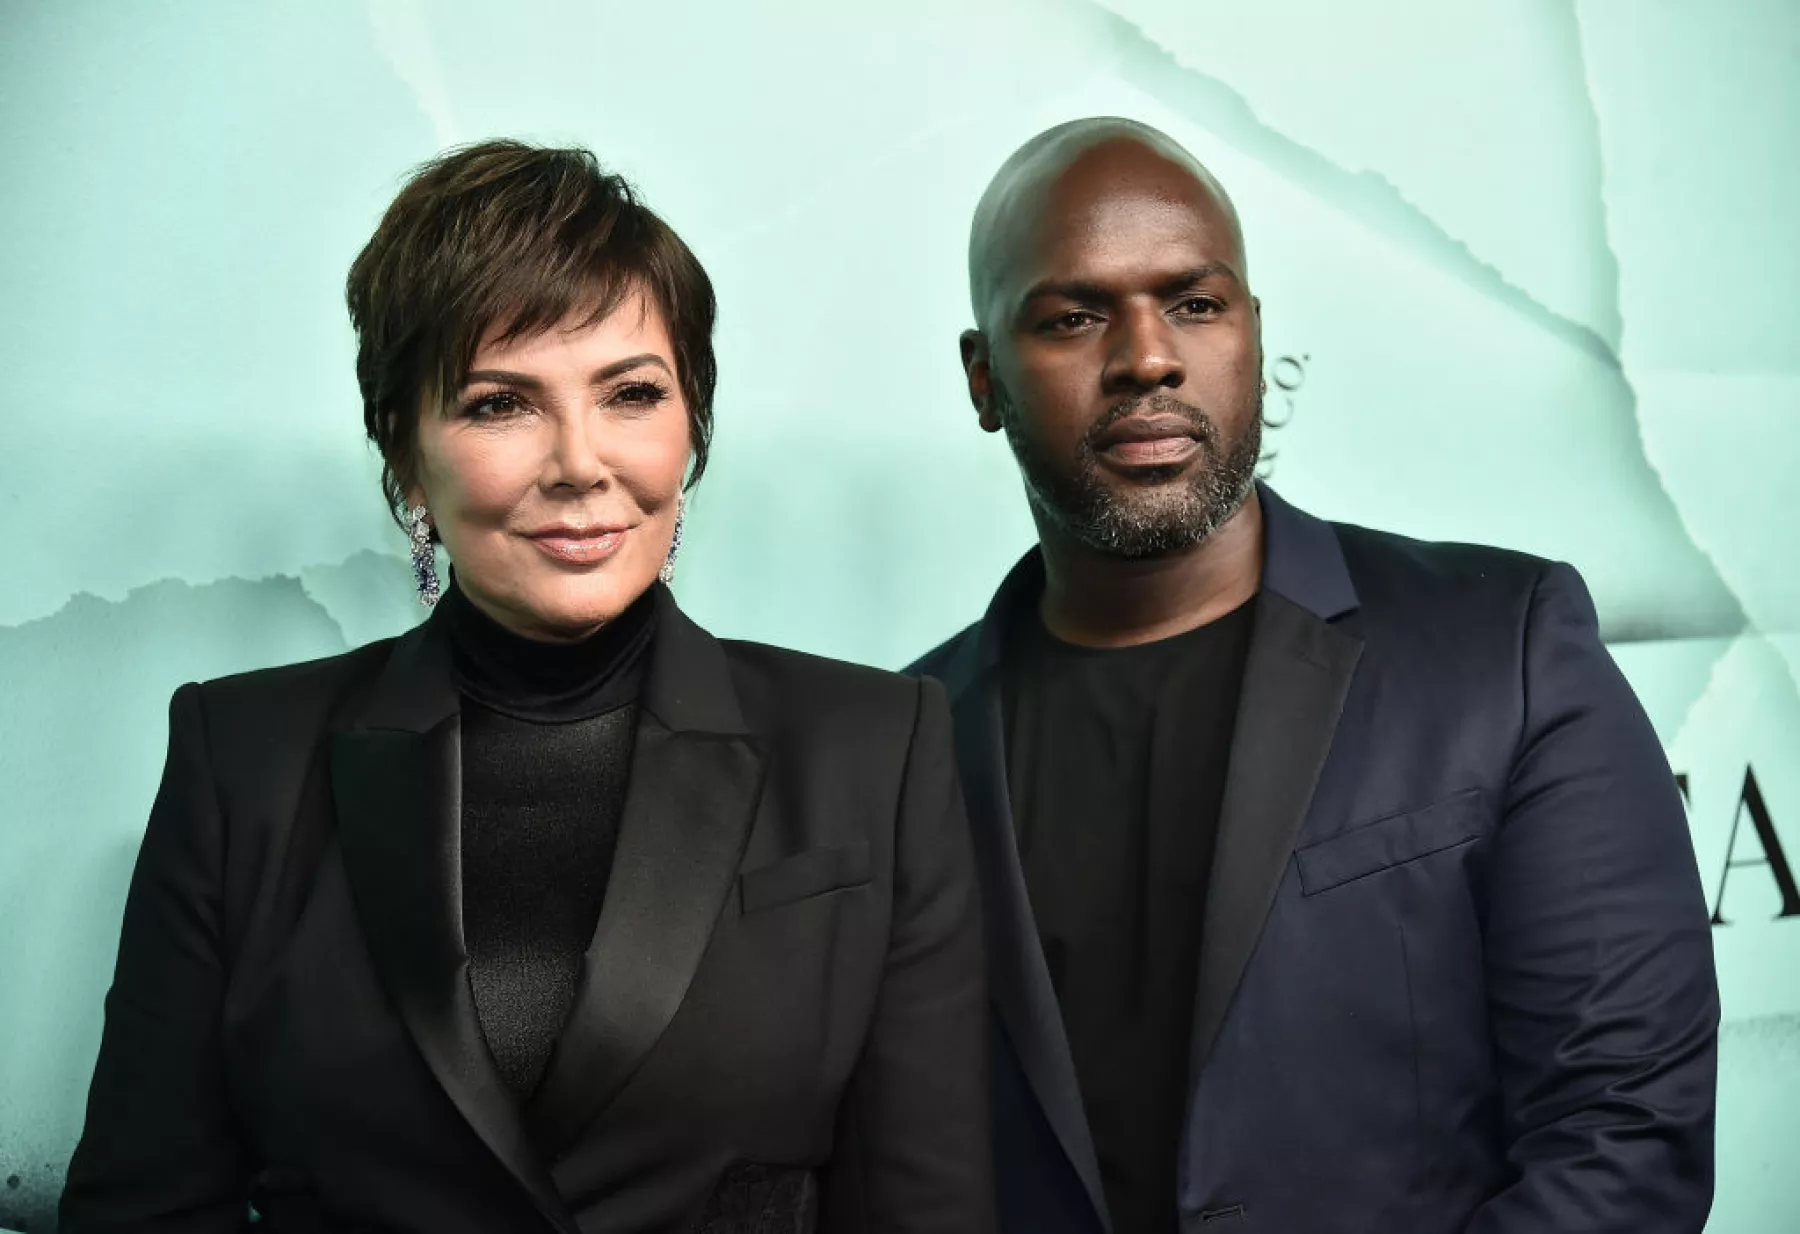 Corey Gamble and Kris Jenner;  Kim Kardashian debuts on 'SNL' with an irreverent monologue that made the internet laugh